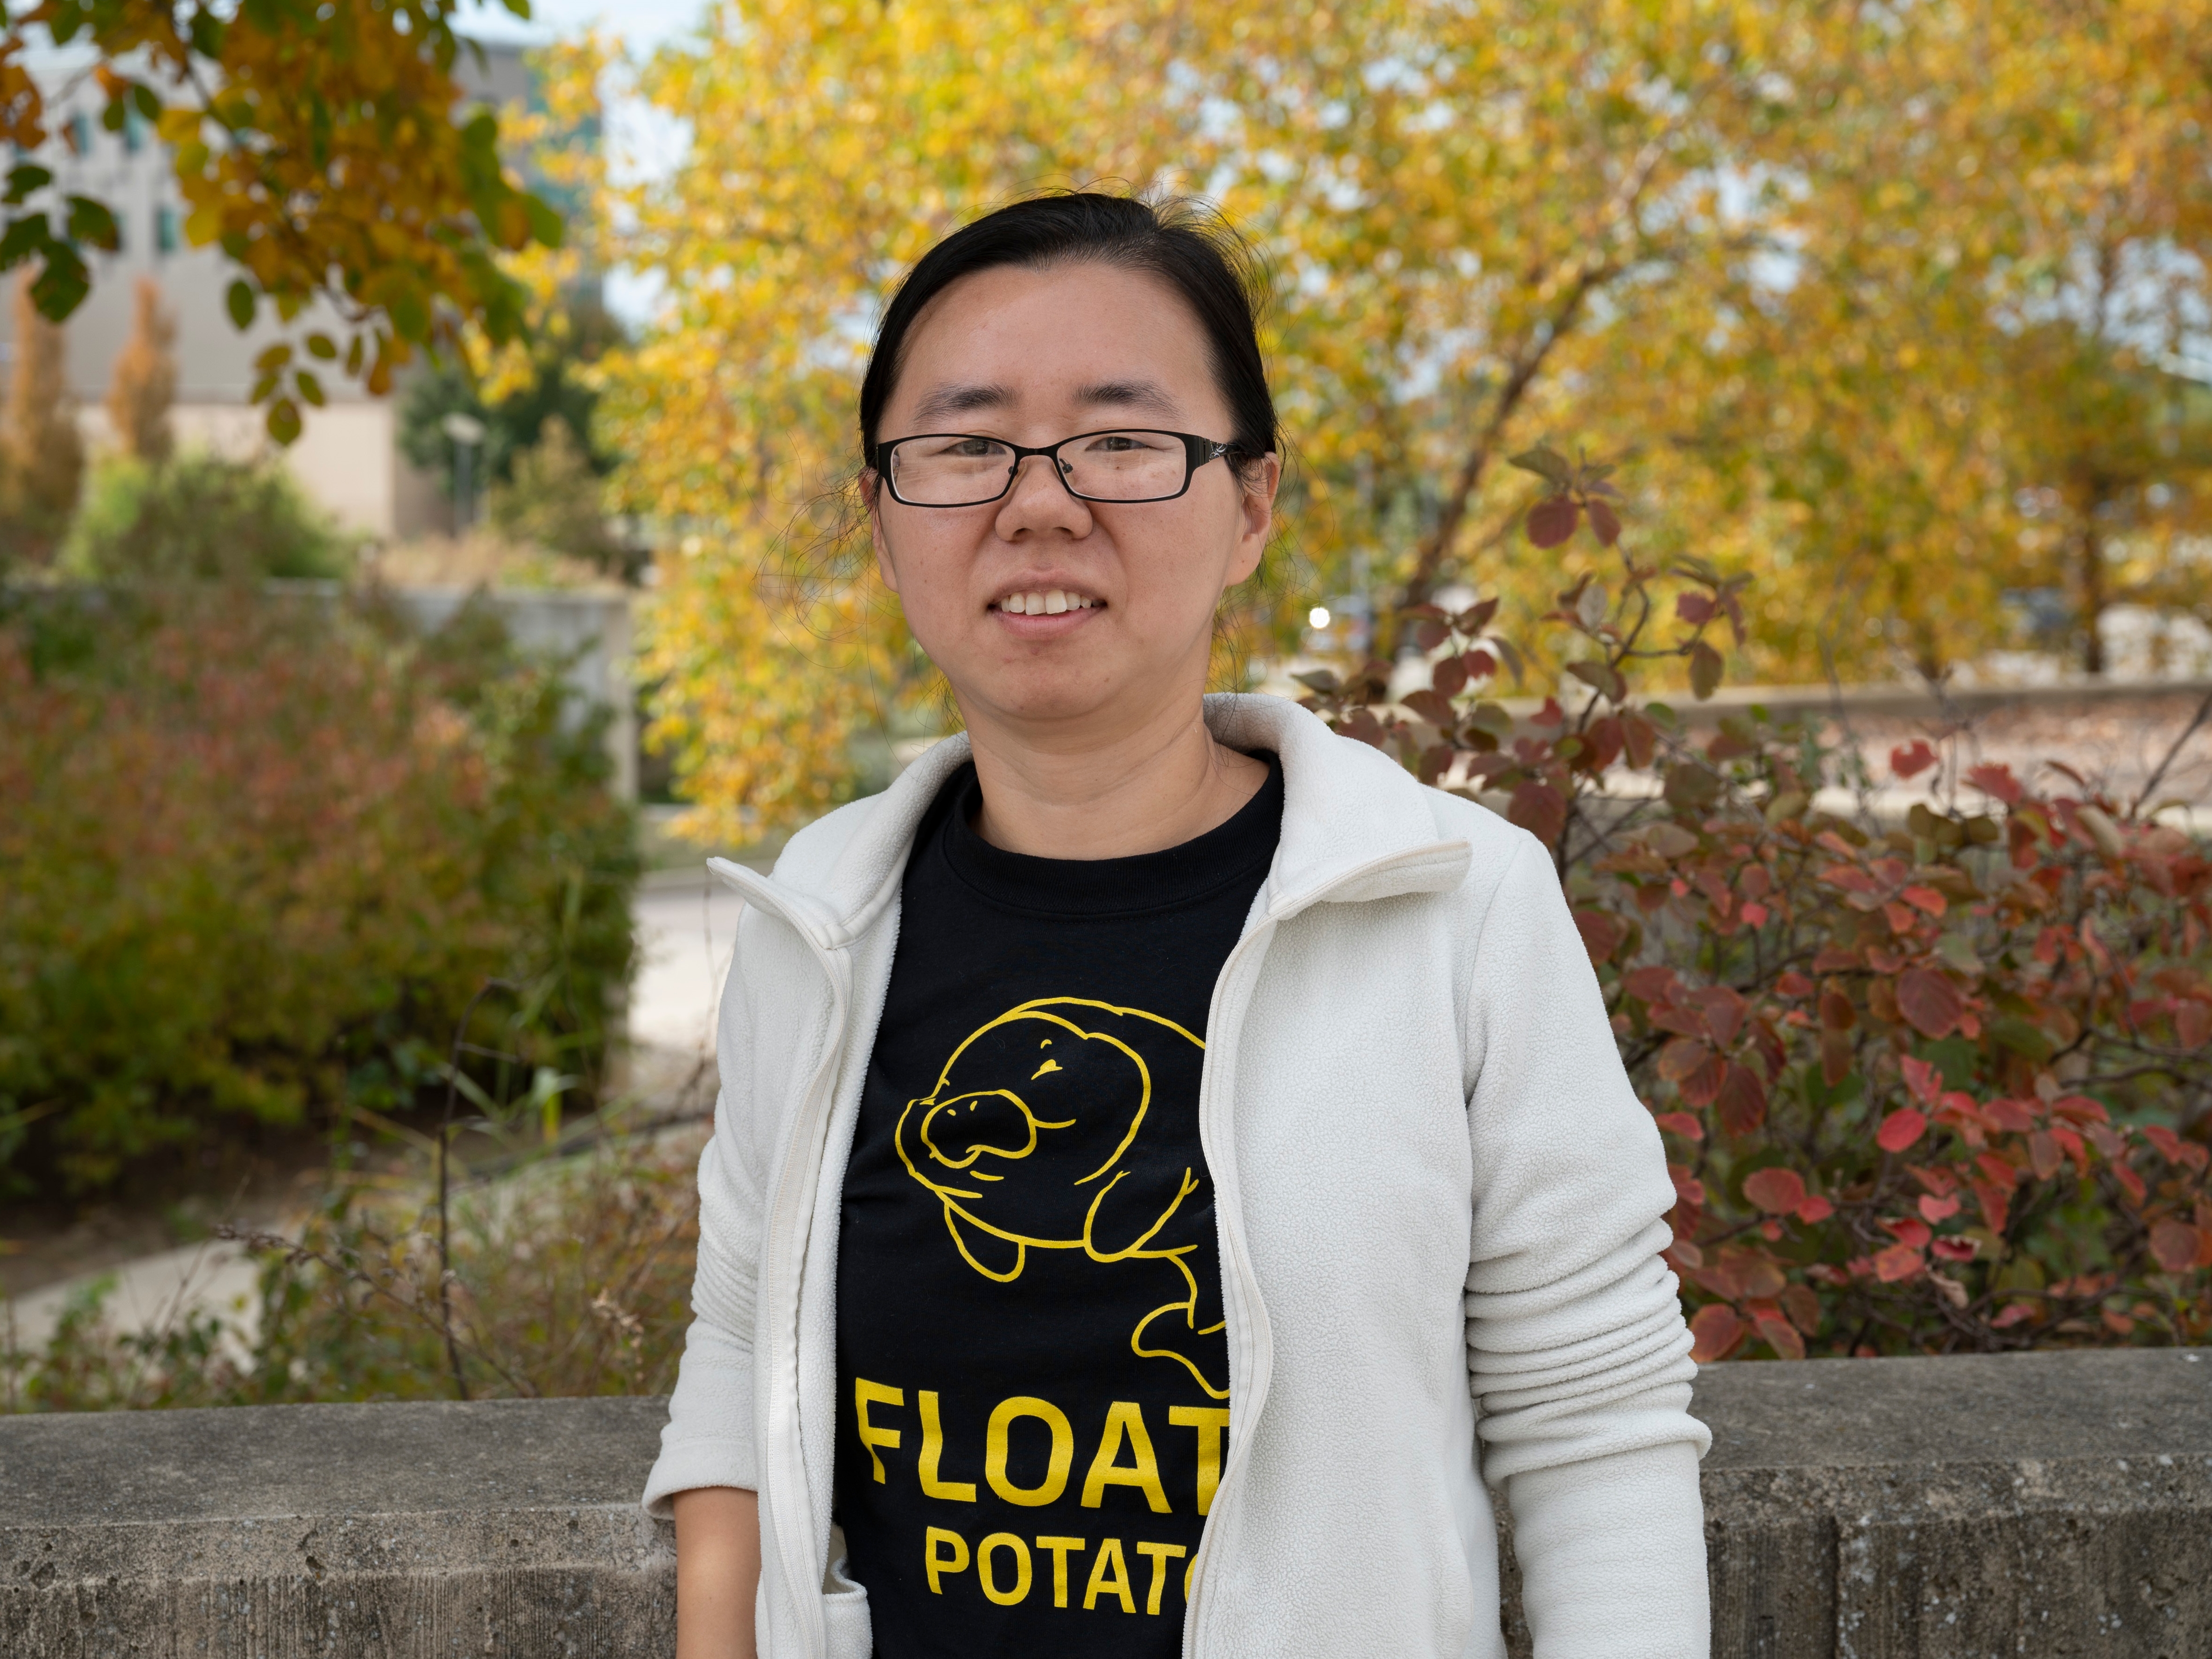 Photo of Dr. Xie taken outside, on the NKU campus, during the biology Olympics event.